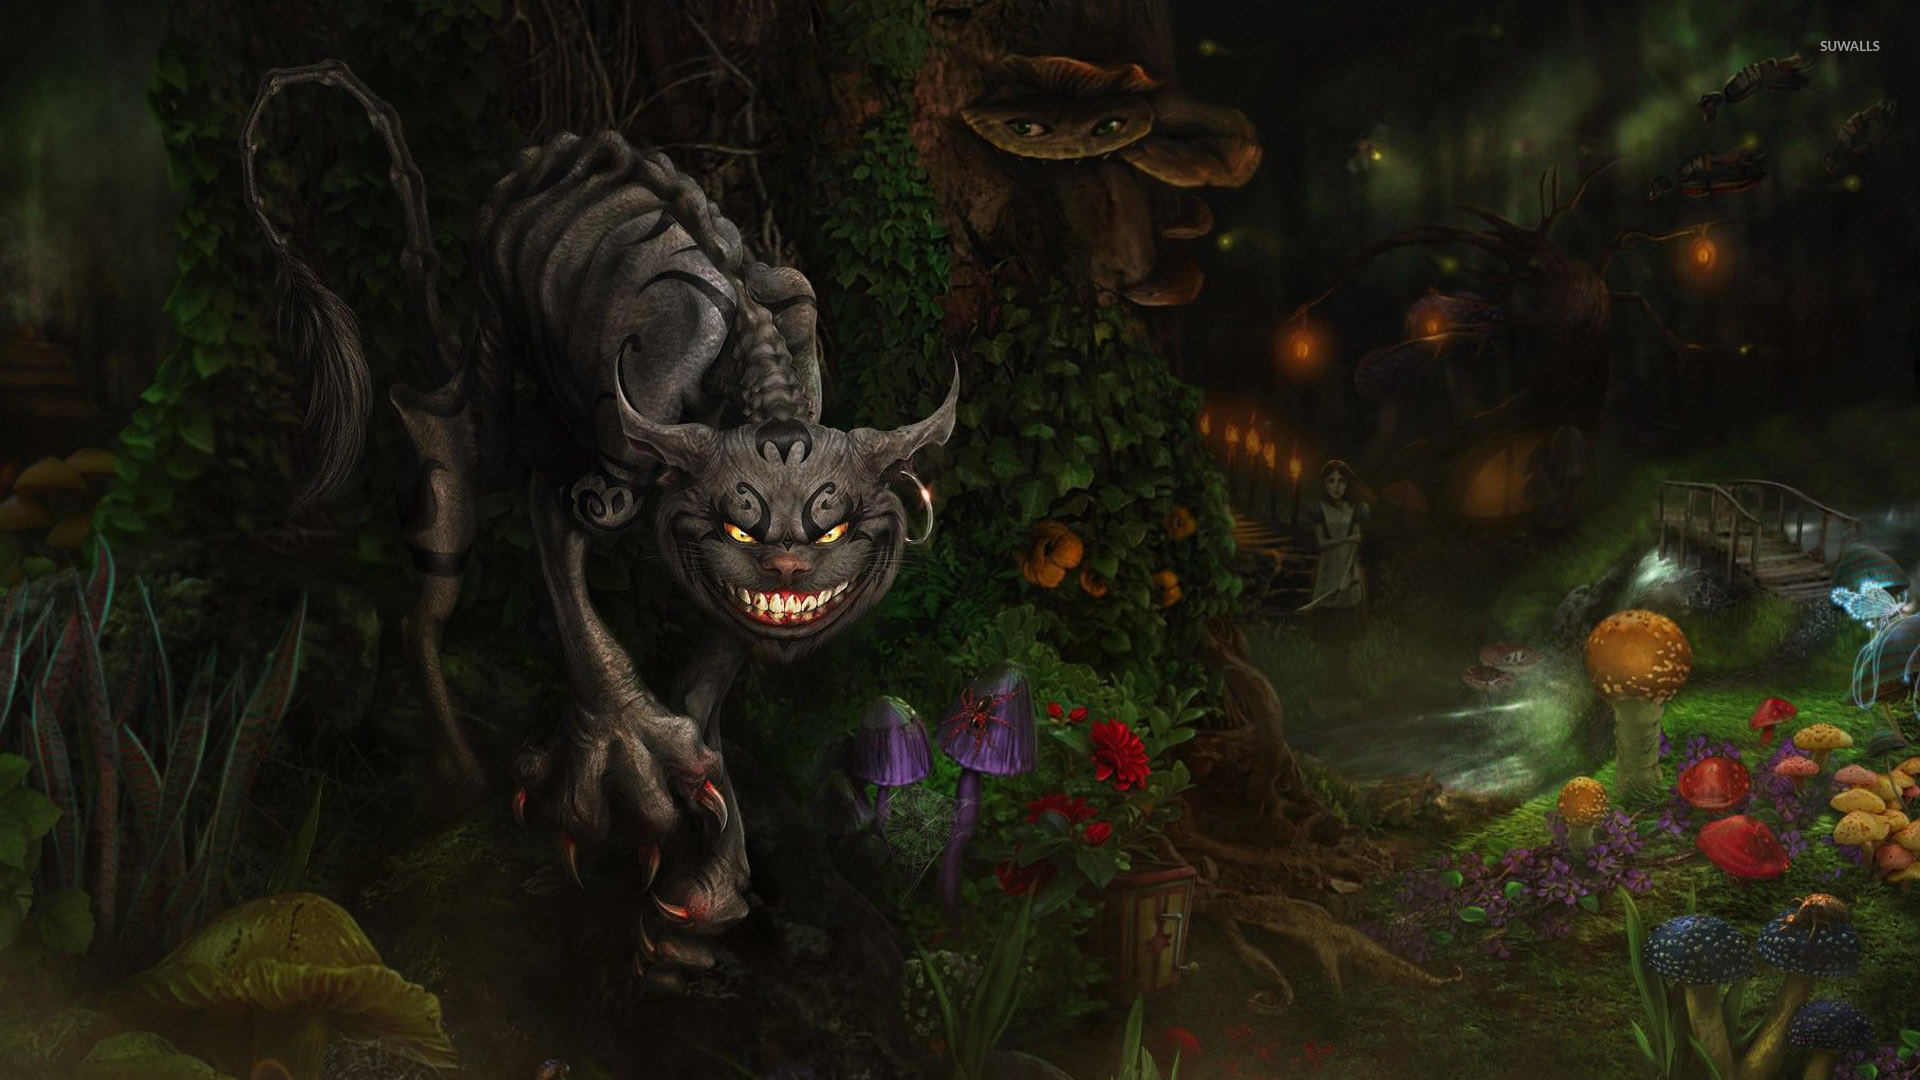 Alice Madness Returns Wallpapers  Wallpaper Cave